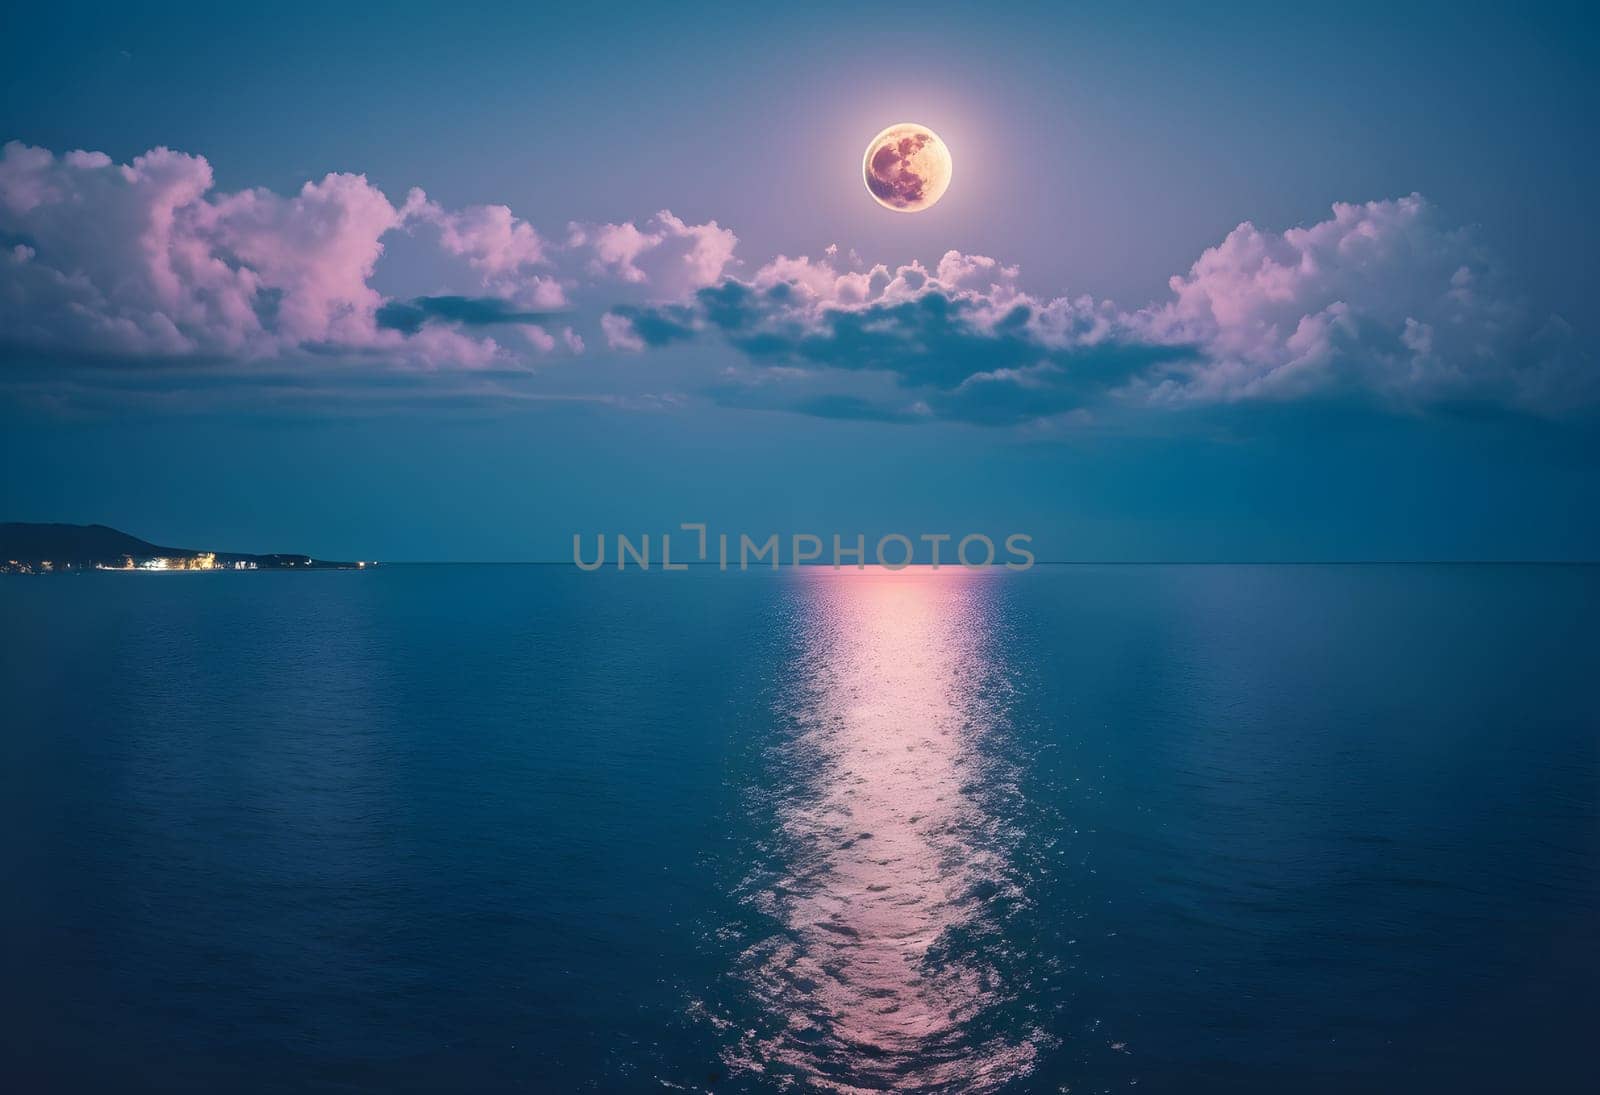 Moonlit Serenity: Panoramic Views of the Sea Under a Colorful Night Sky by Petrichor